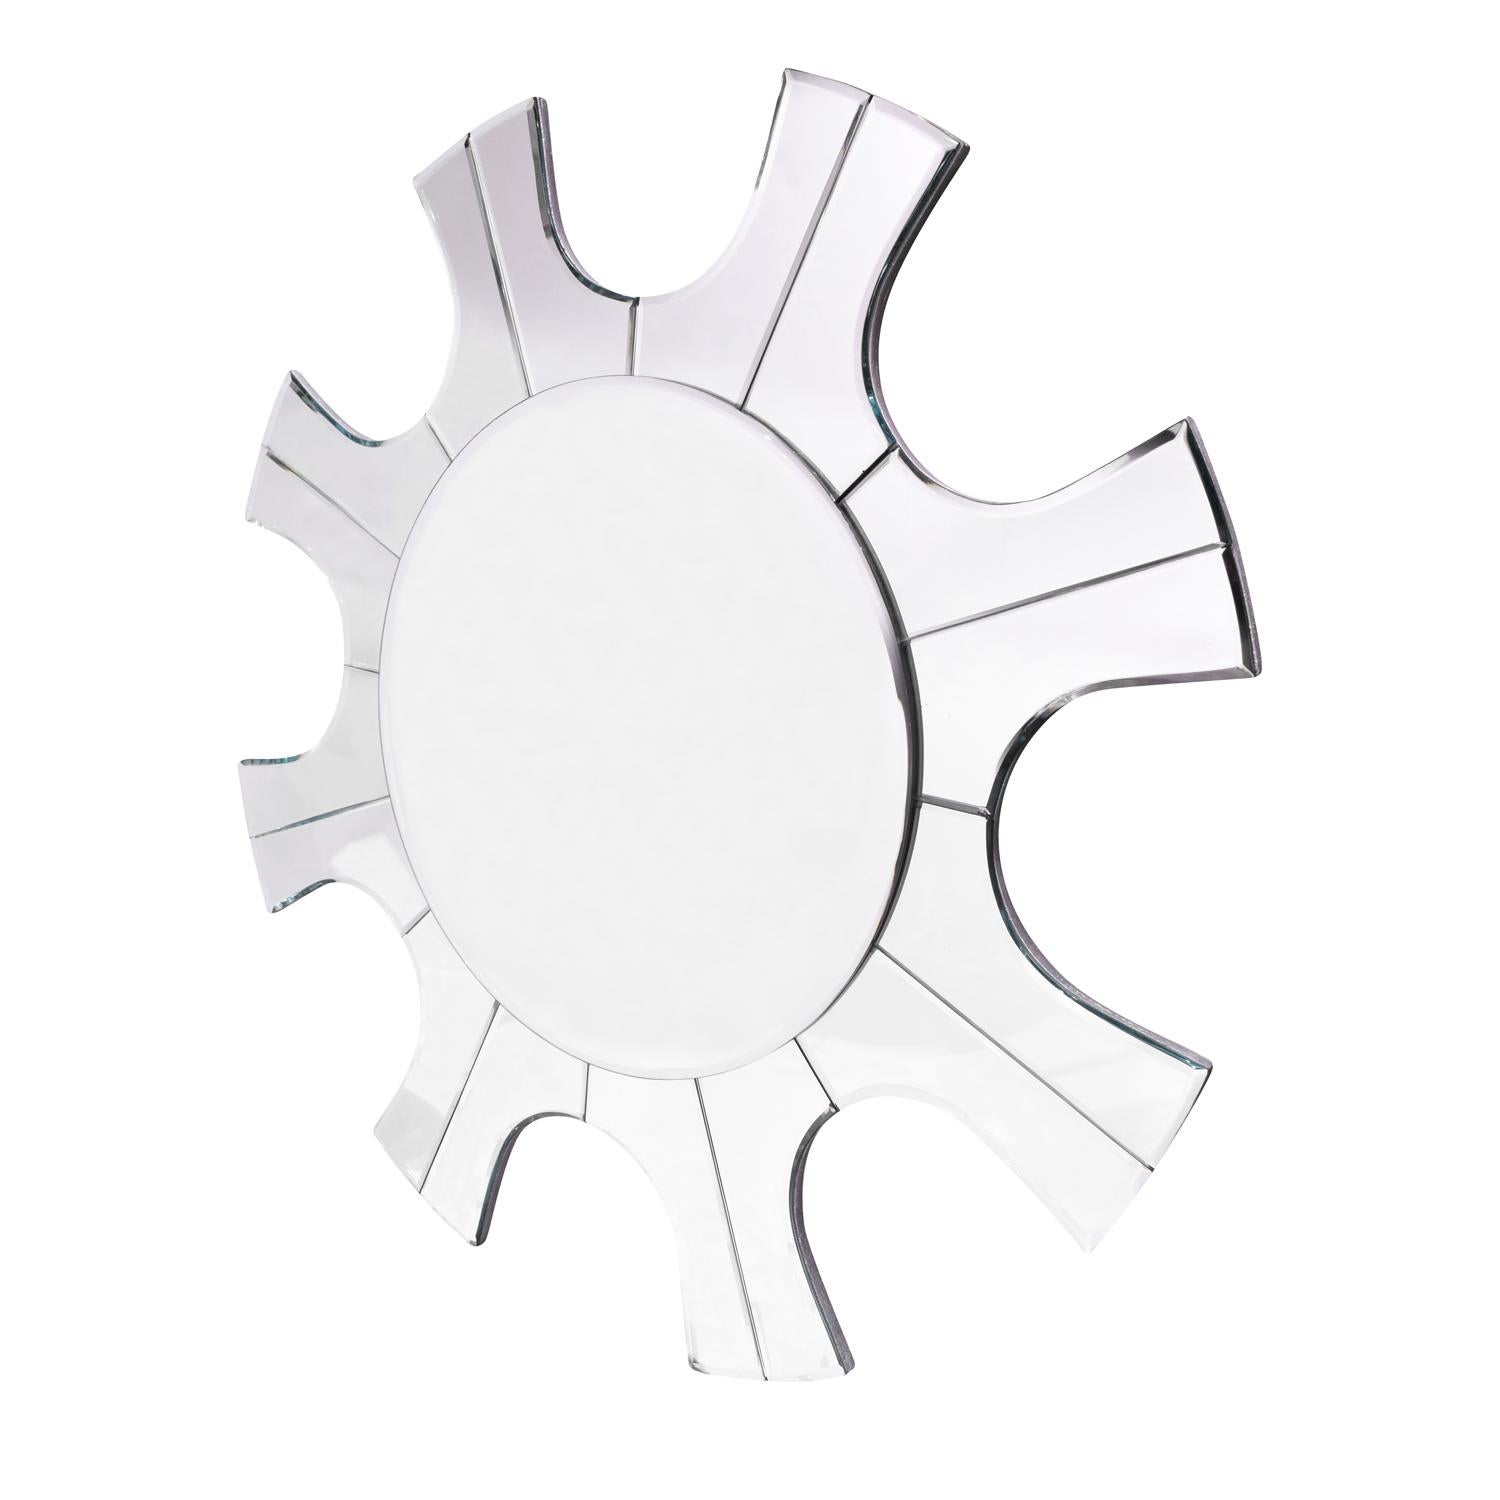 Sculptural mirror model 507, radiating sun design, by Tommi Parzinger for Parzinger Originals, American 1950s. This design showcases the elegance that Tommi Parzinger is famous for.

Reference:
Parzinger Originals paper catalog published in the